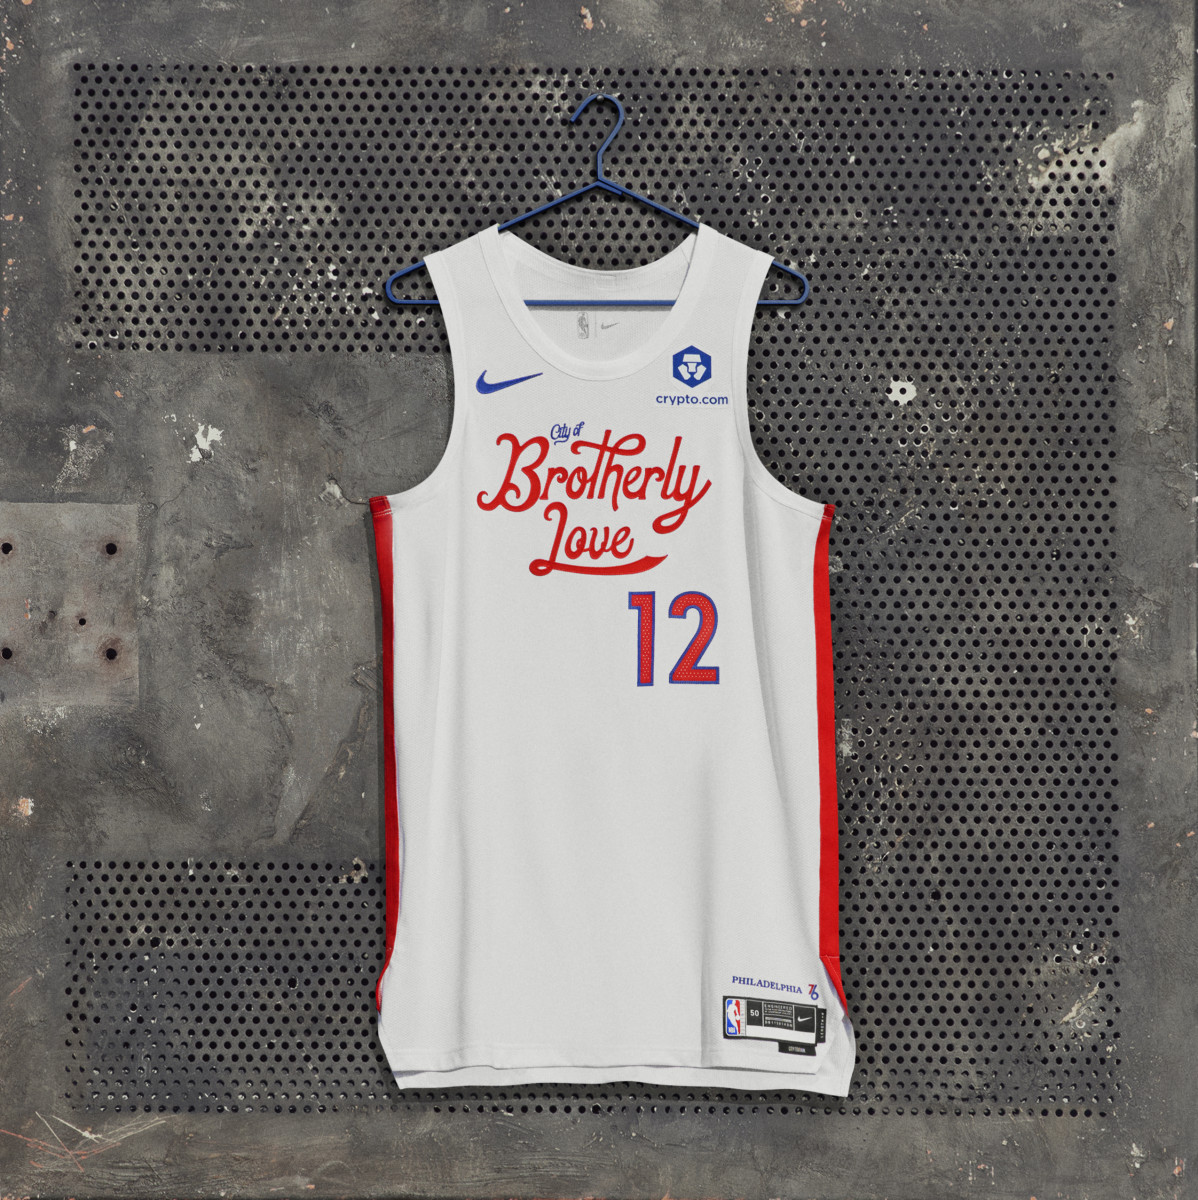 Philadelphia 76ers unveil 'City Edition' jerseys inspired by